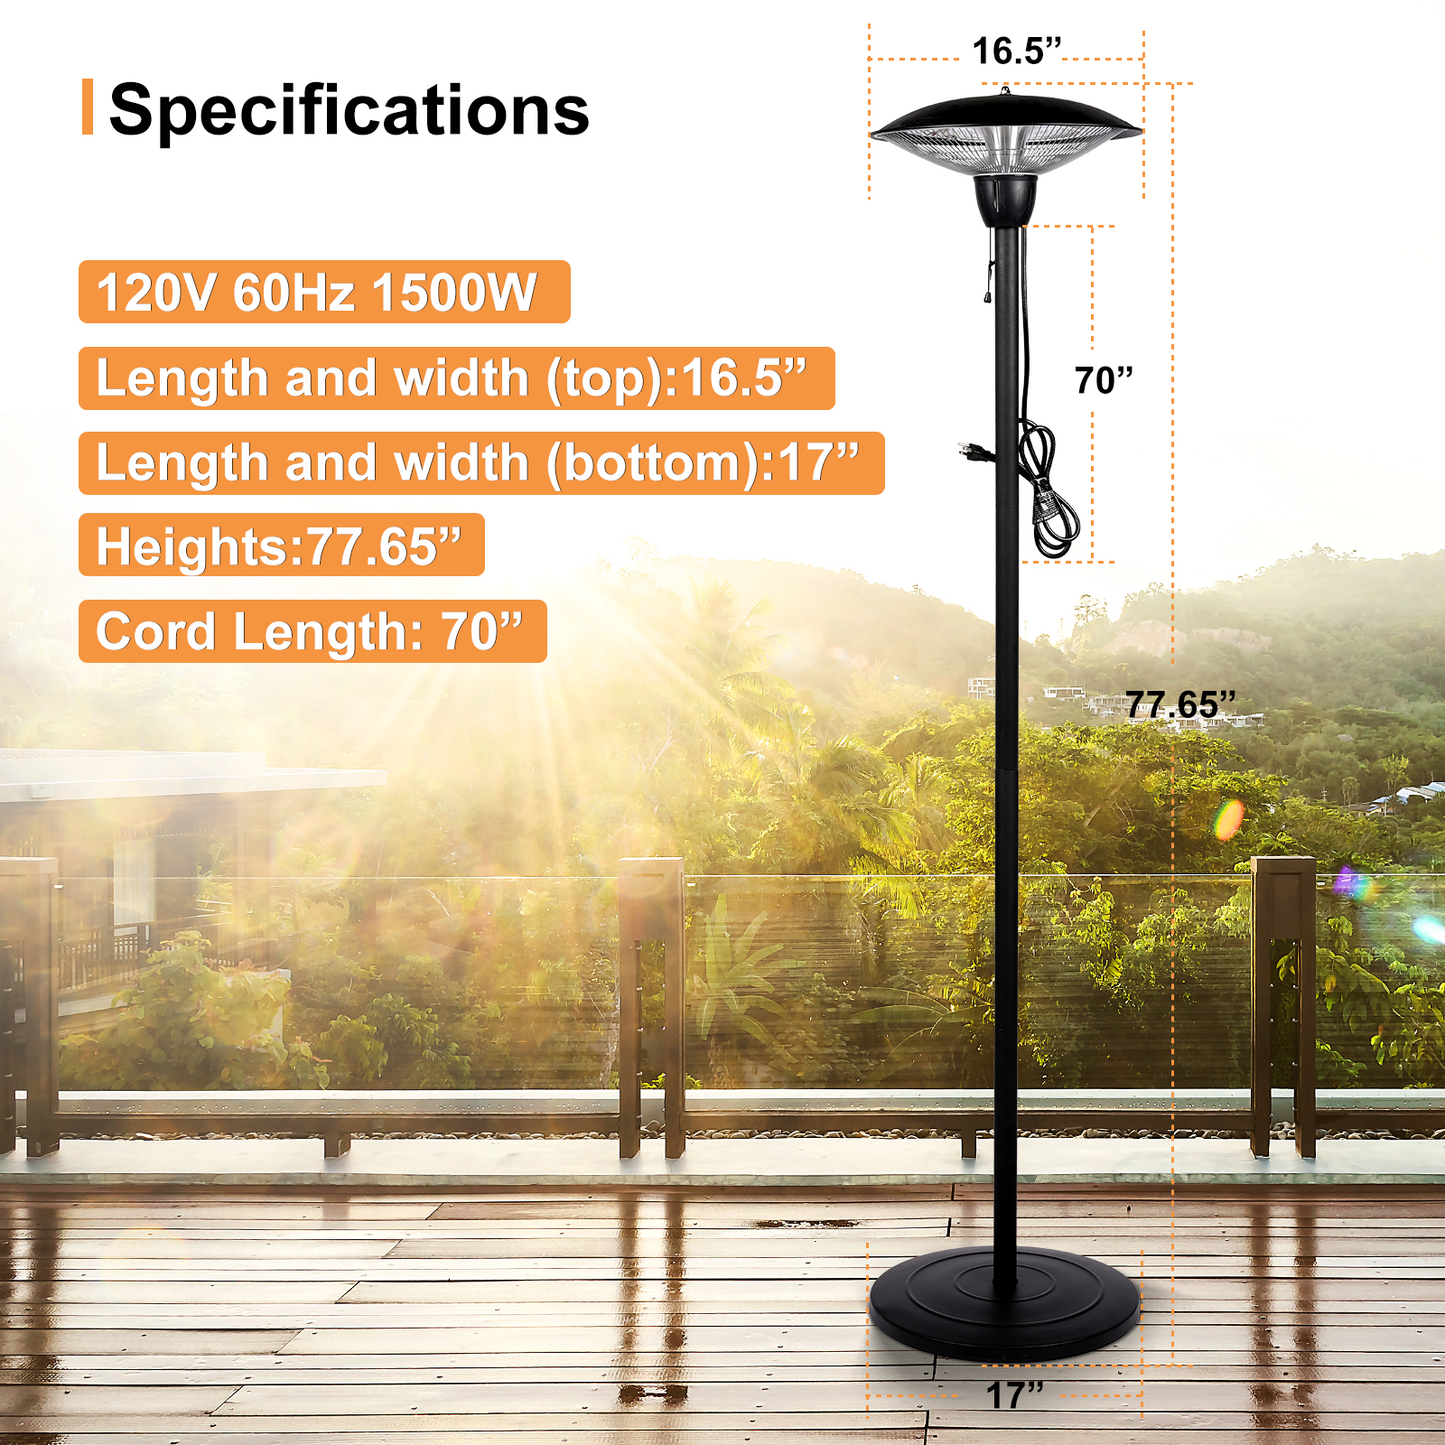 Simple Deluxe 1500W Patio Heater,Outdoor Patio Heater,Outdoor Electric Heater,Infrared Heater for Patios and Balconies, Camping, Tailgating 77.65" * 17"* 16.5"